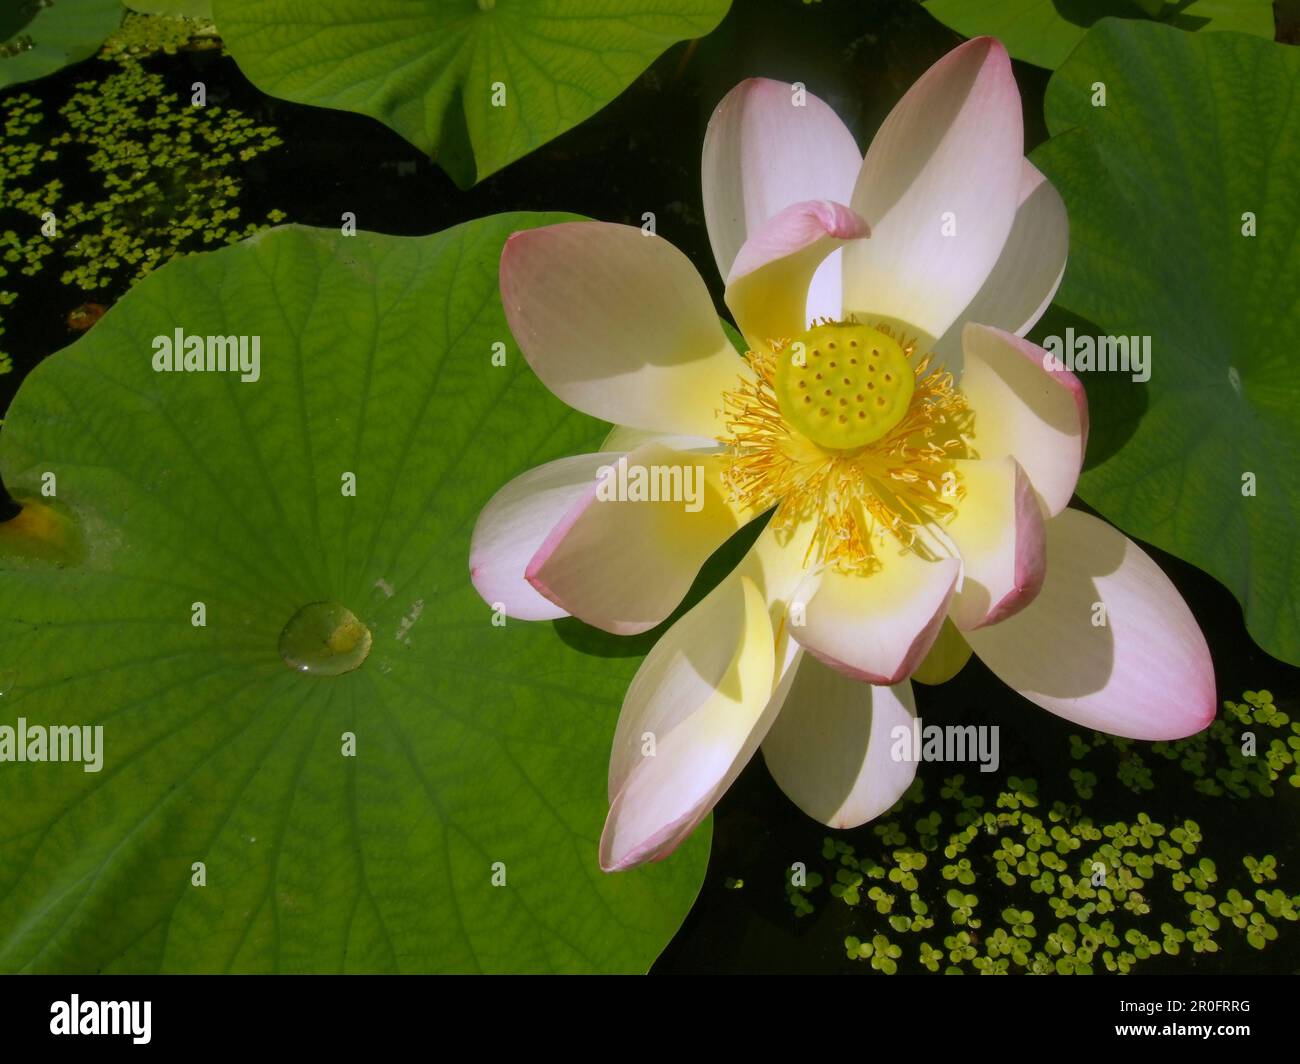 Switzerland Zuerich, Lotus flower in the park of Ethnographic Museum of the University of Zuerich Stock Photo